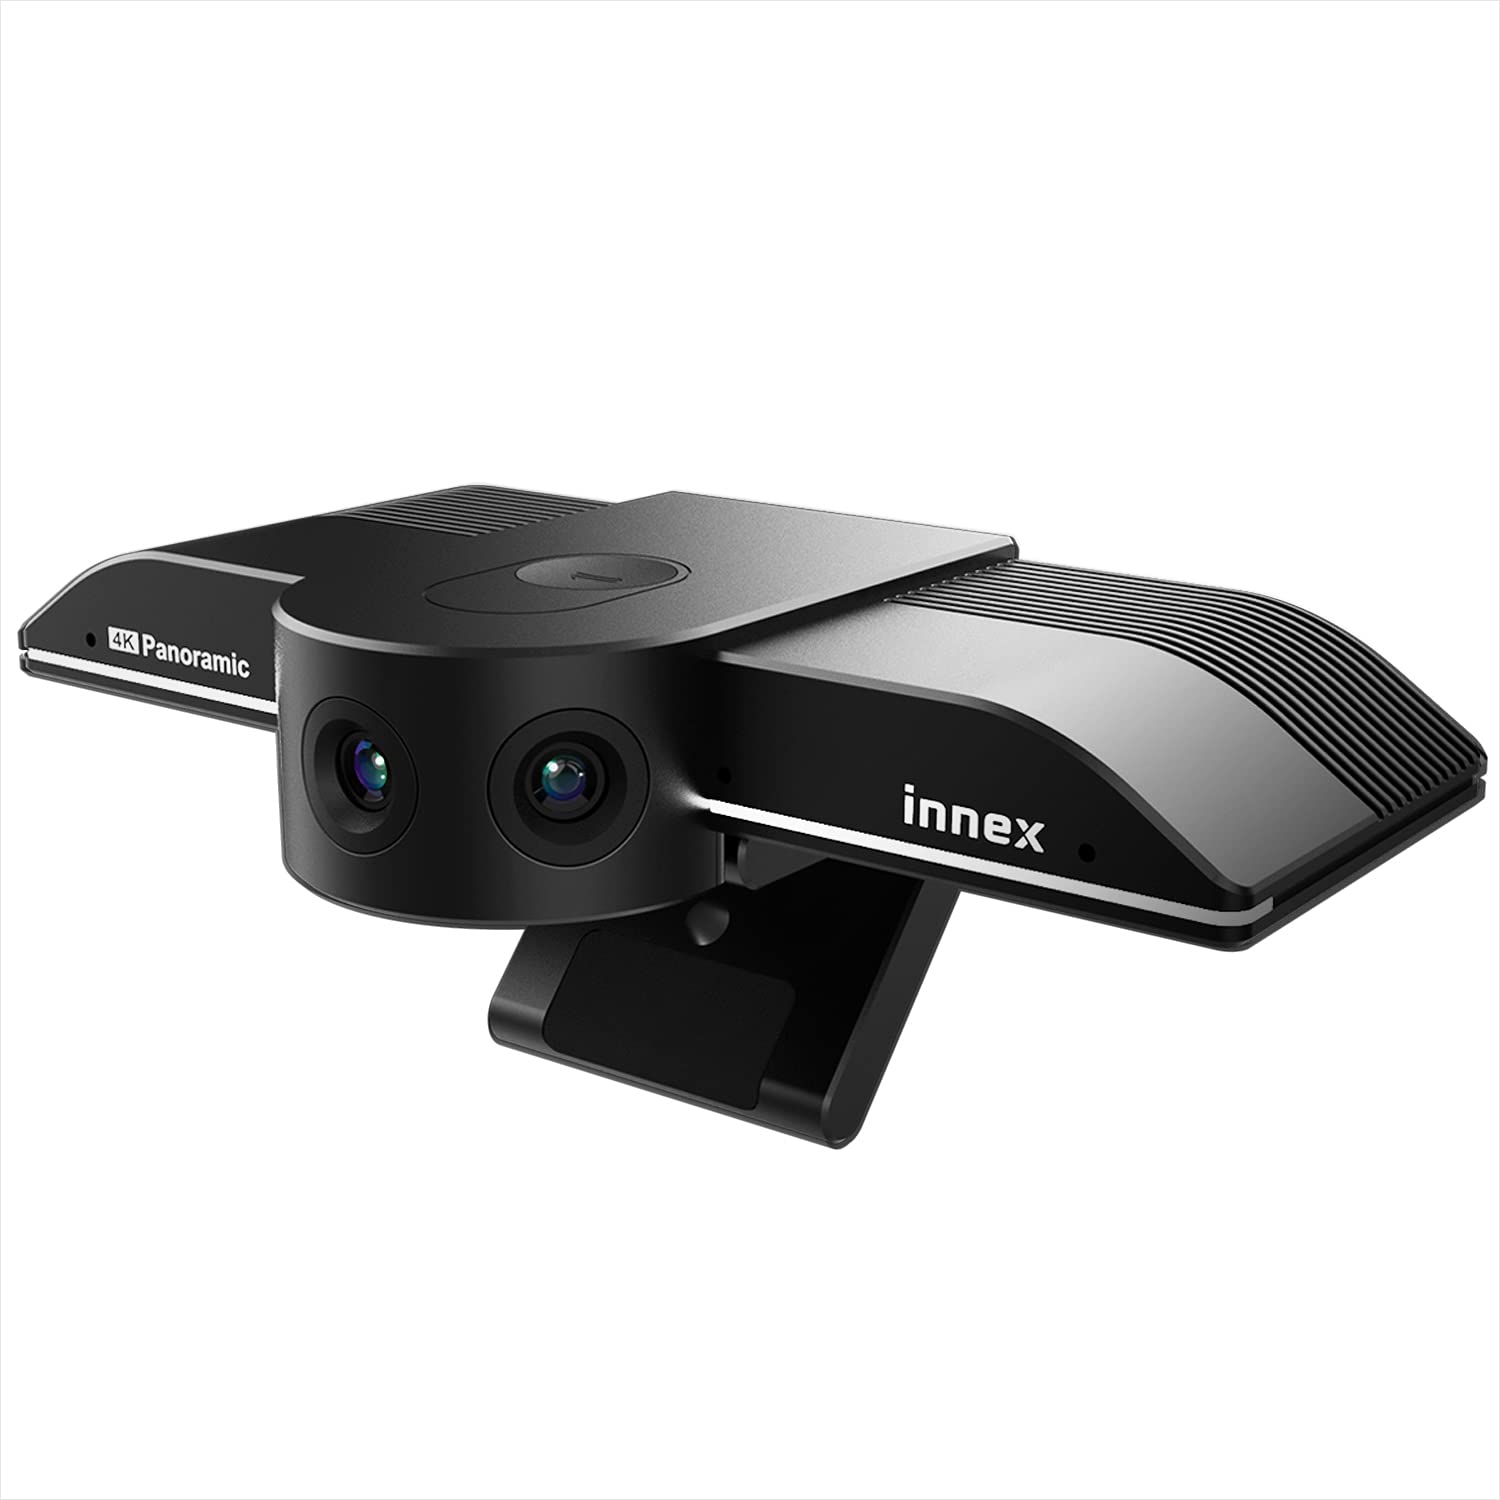 4K Panoramic Pro Webcam Innex C830, Intelligent Facial Tracking, 180° to 75° Flexible View Angle, Video Conference Camera for Windows, Mac, Meeting...